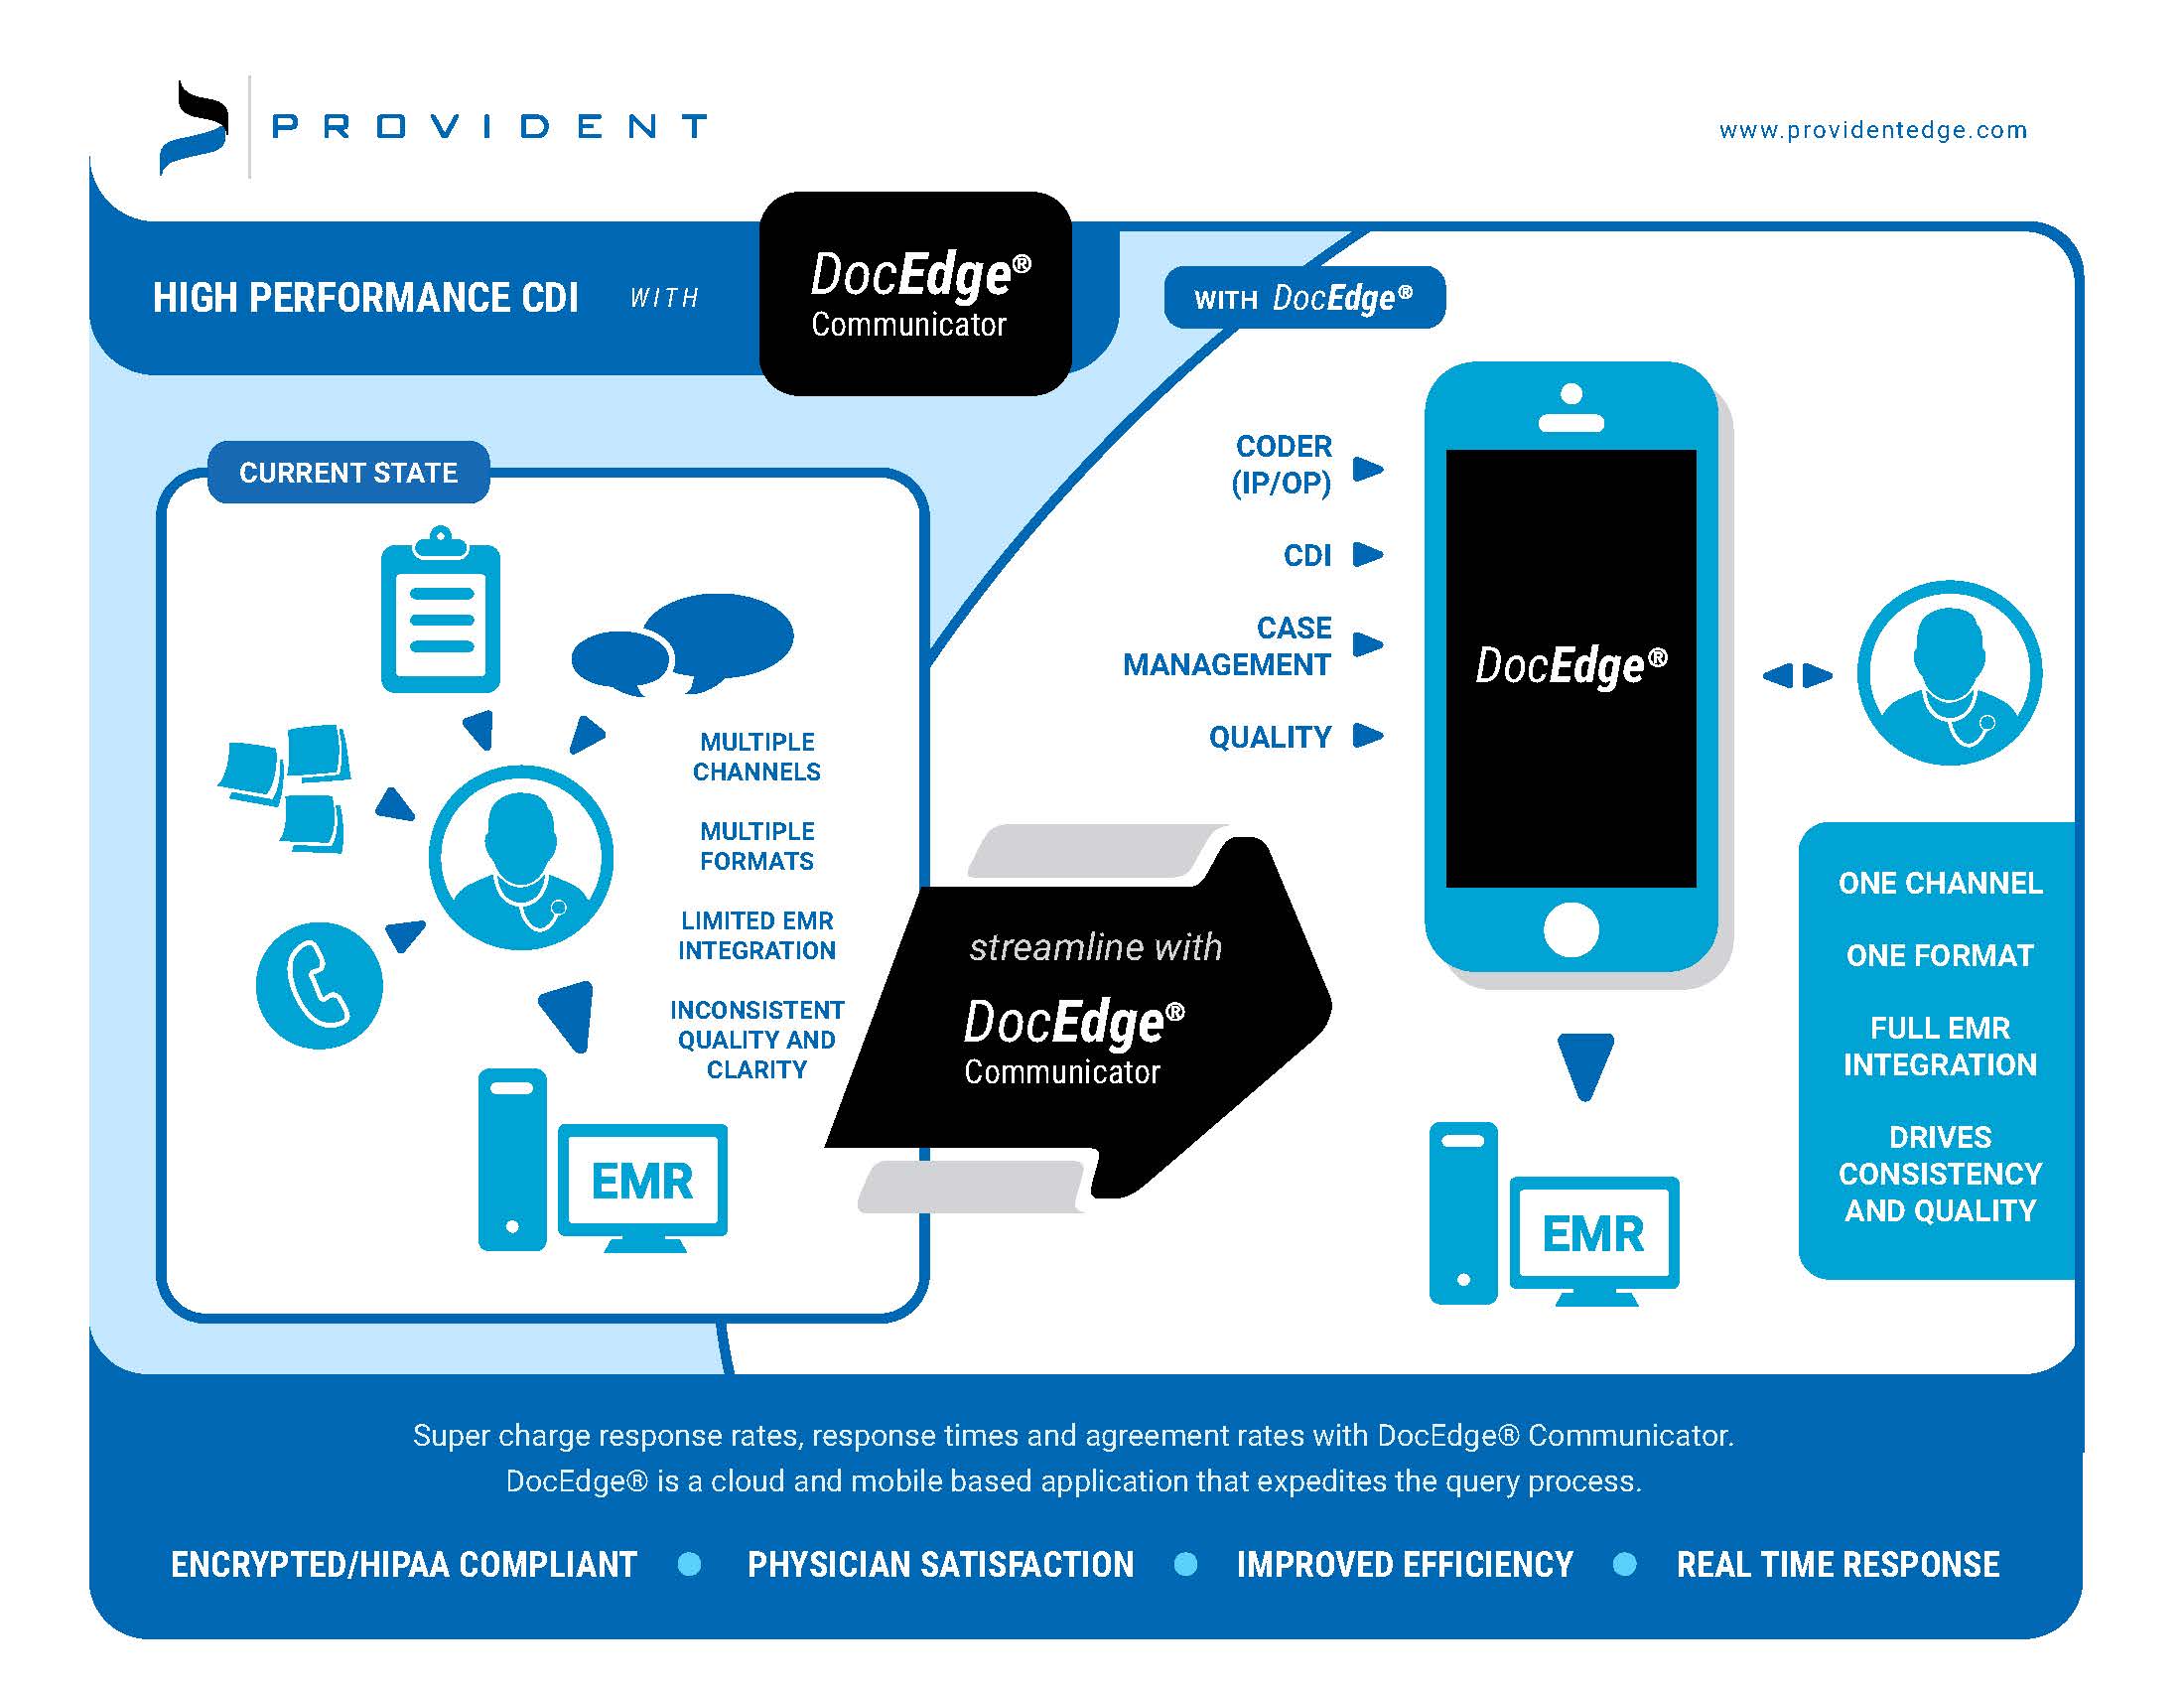 High performance CDI with DocEdge